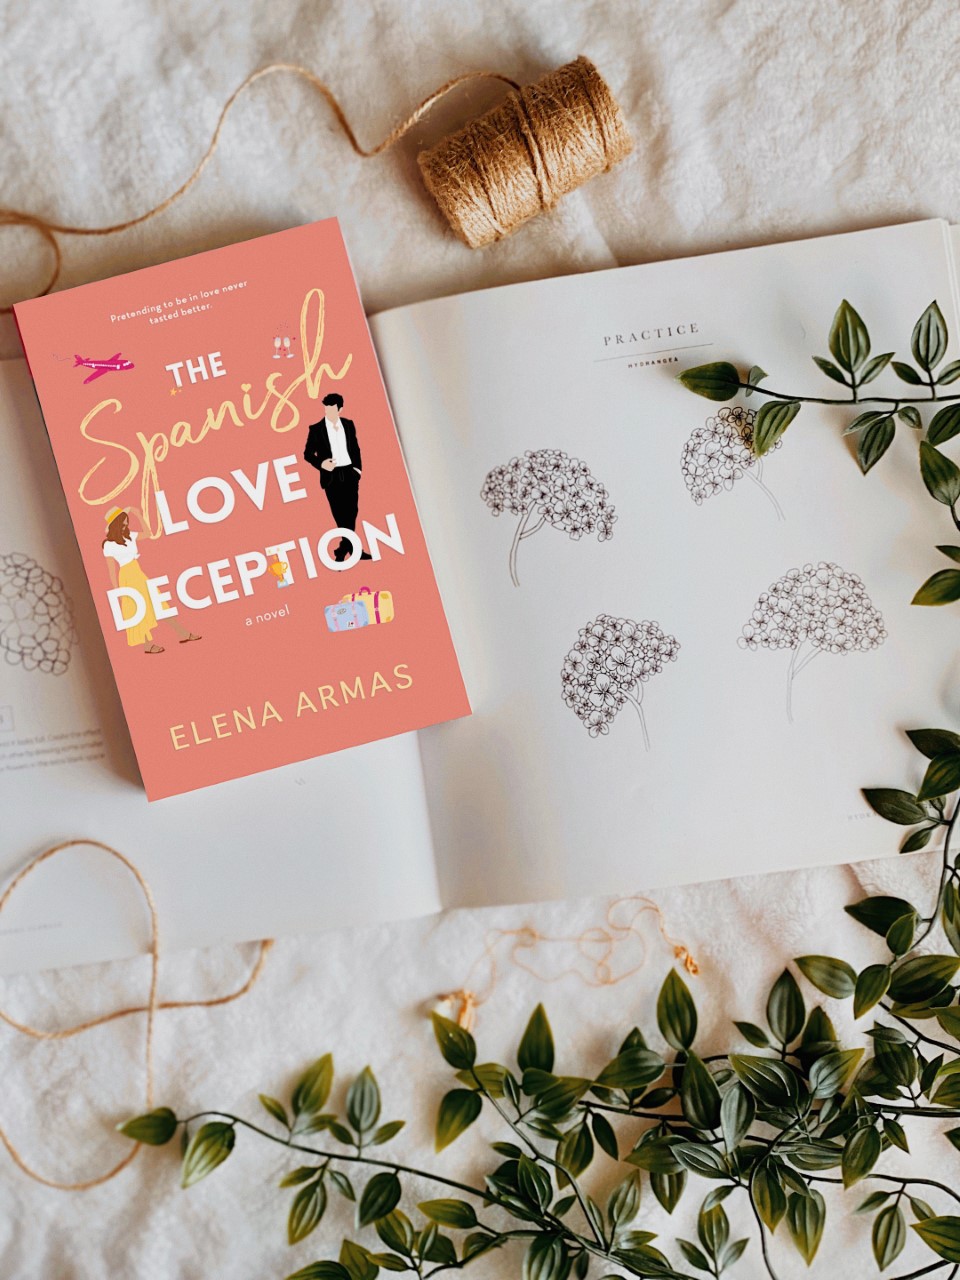 The Spanish Love Deception, by Elena Armas | It has everything we love